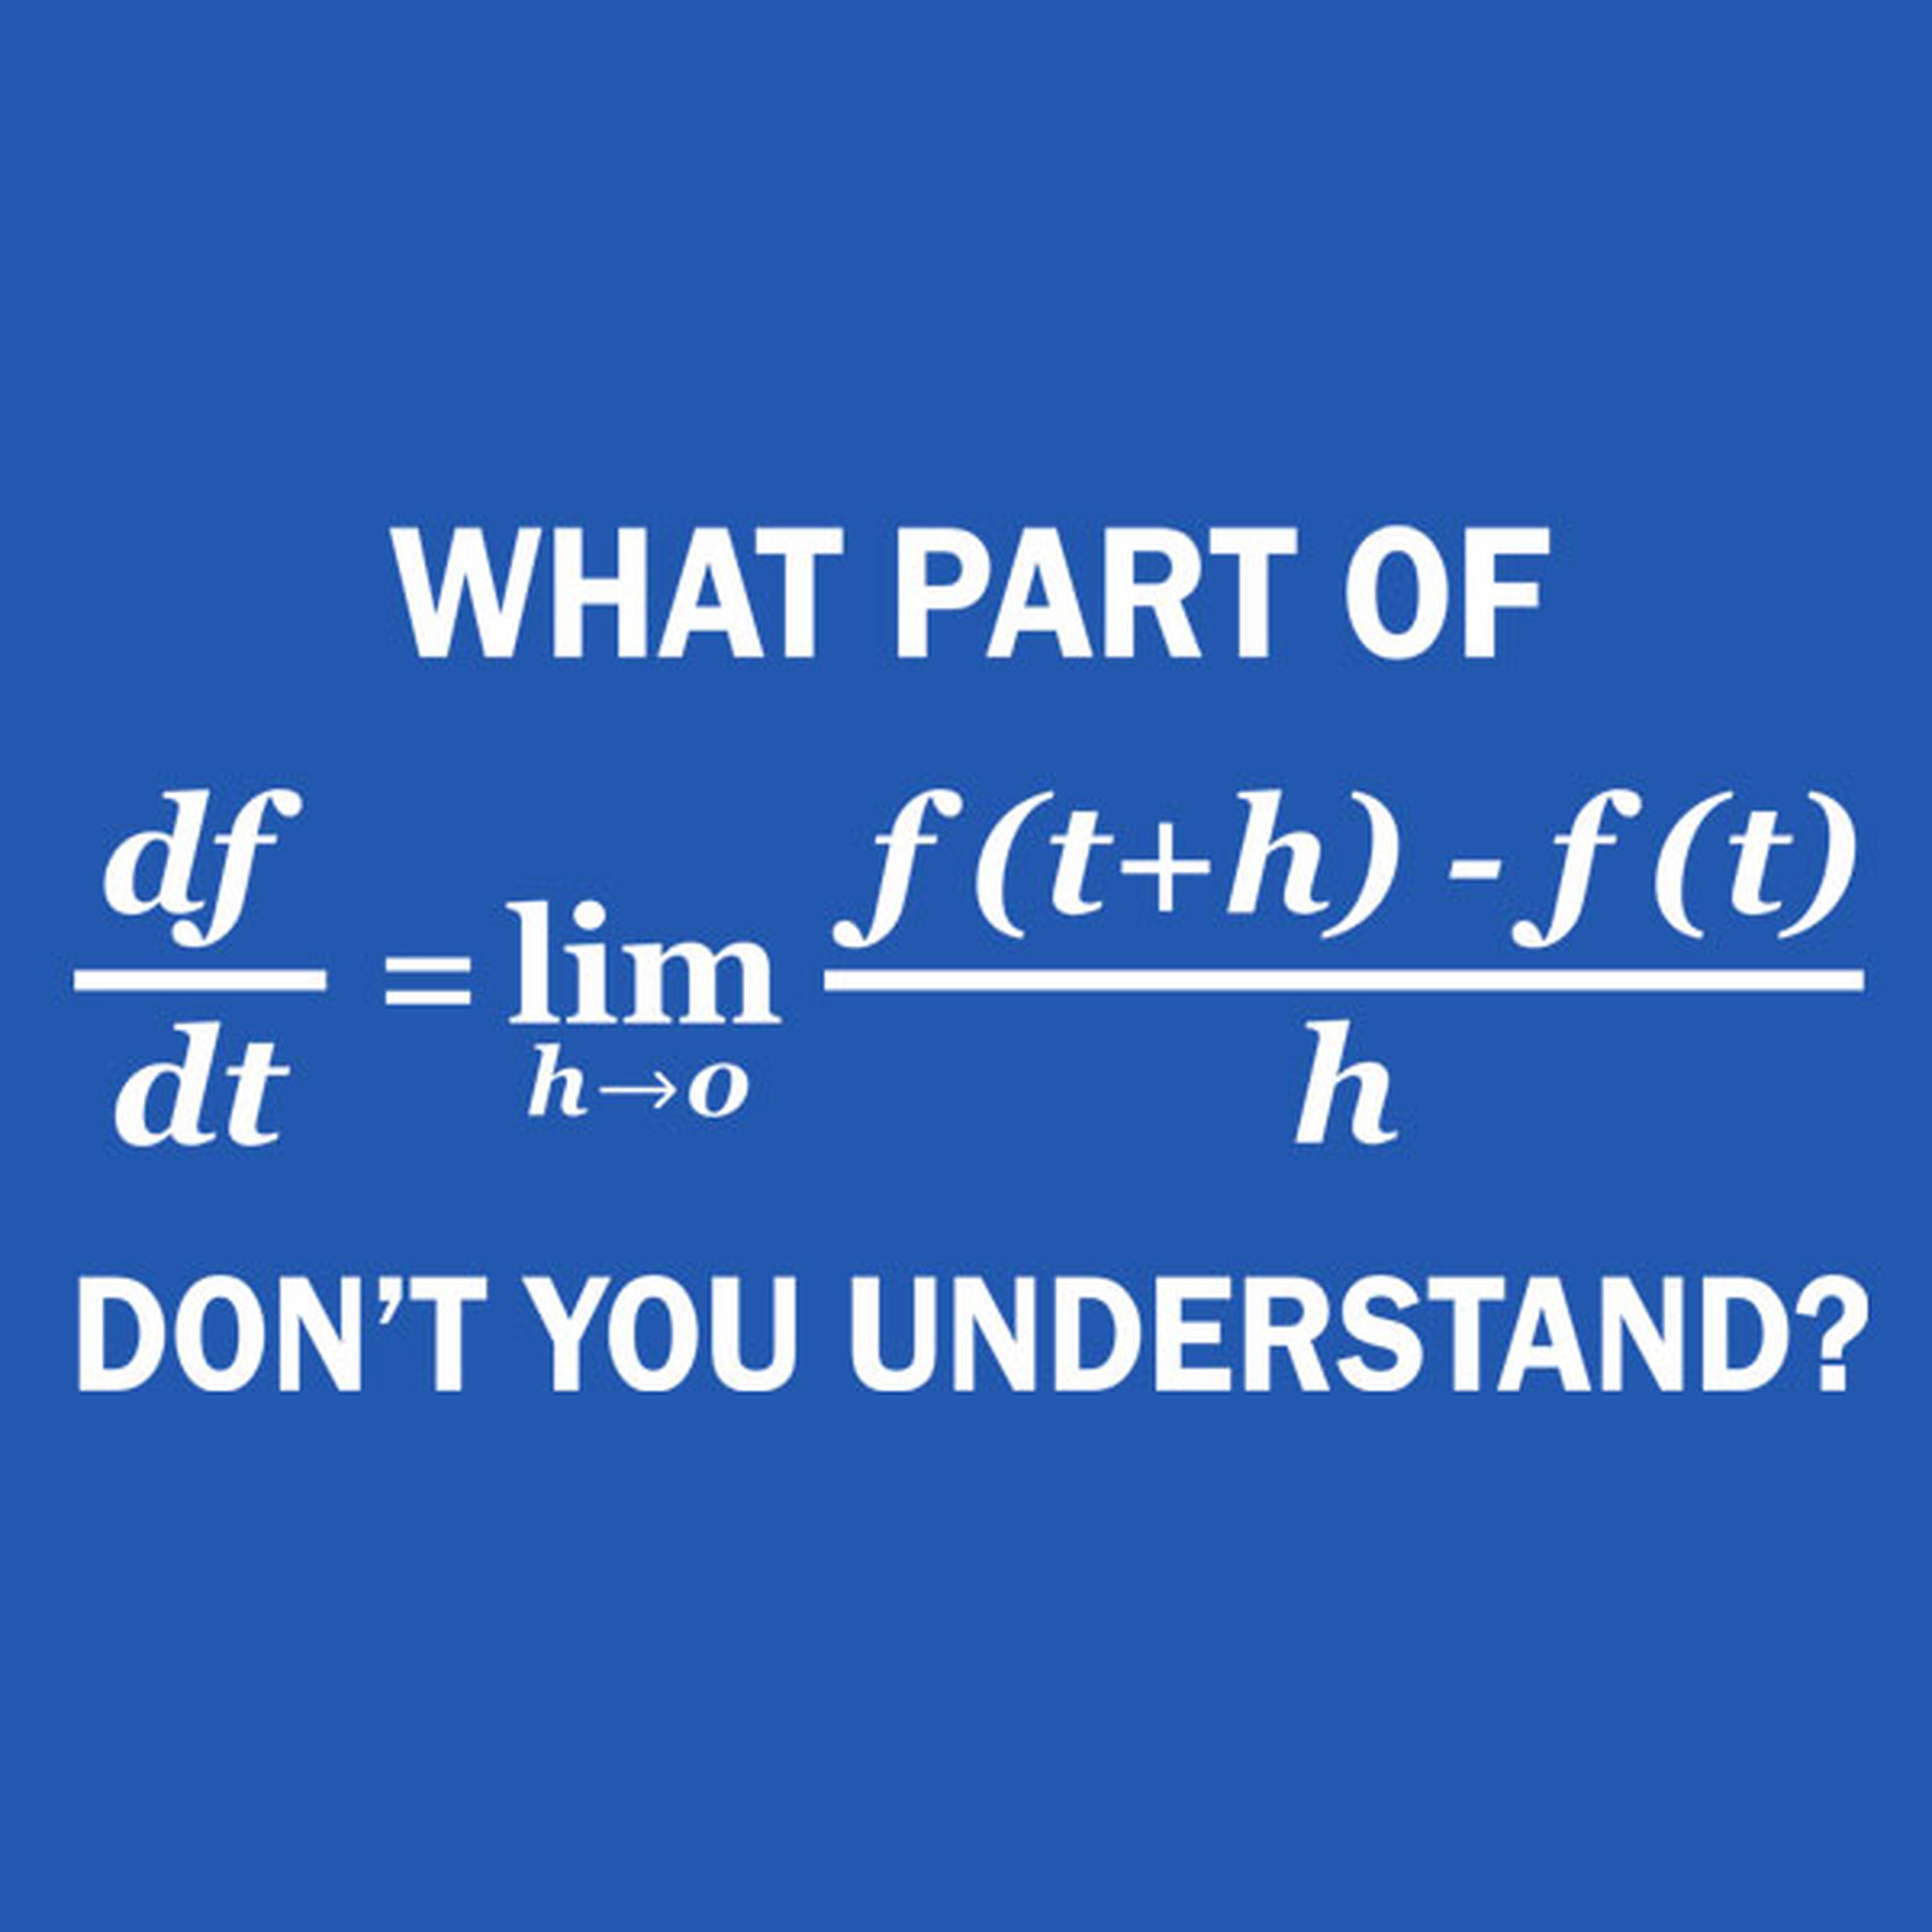 What part of formula don't you understand? - T-shirt